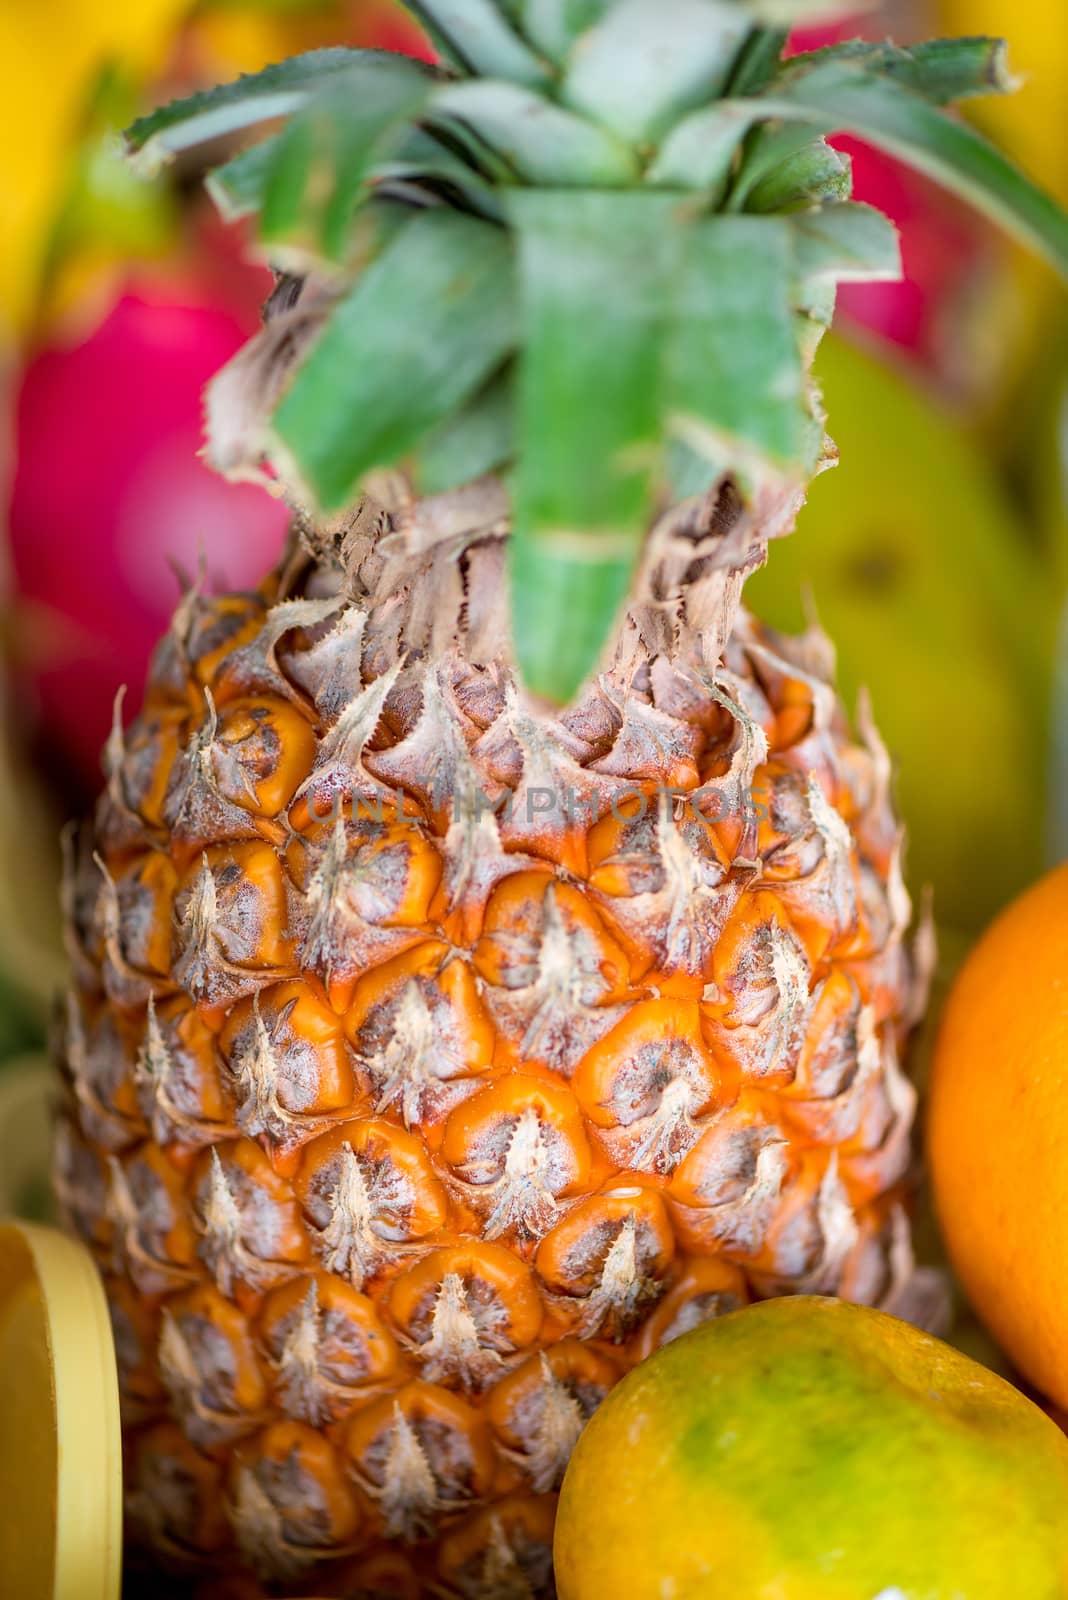 Natural ripe pineapple close-up vertical photo